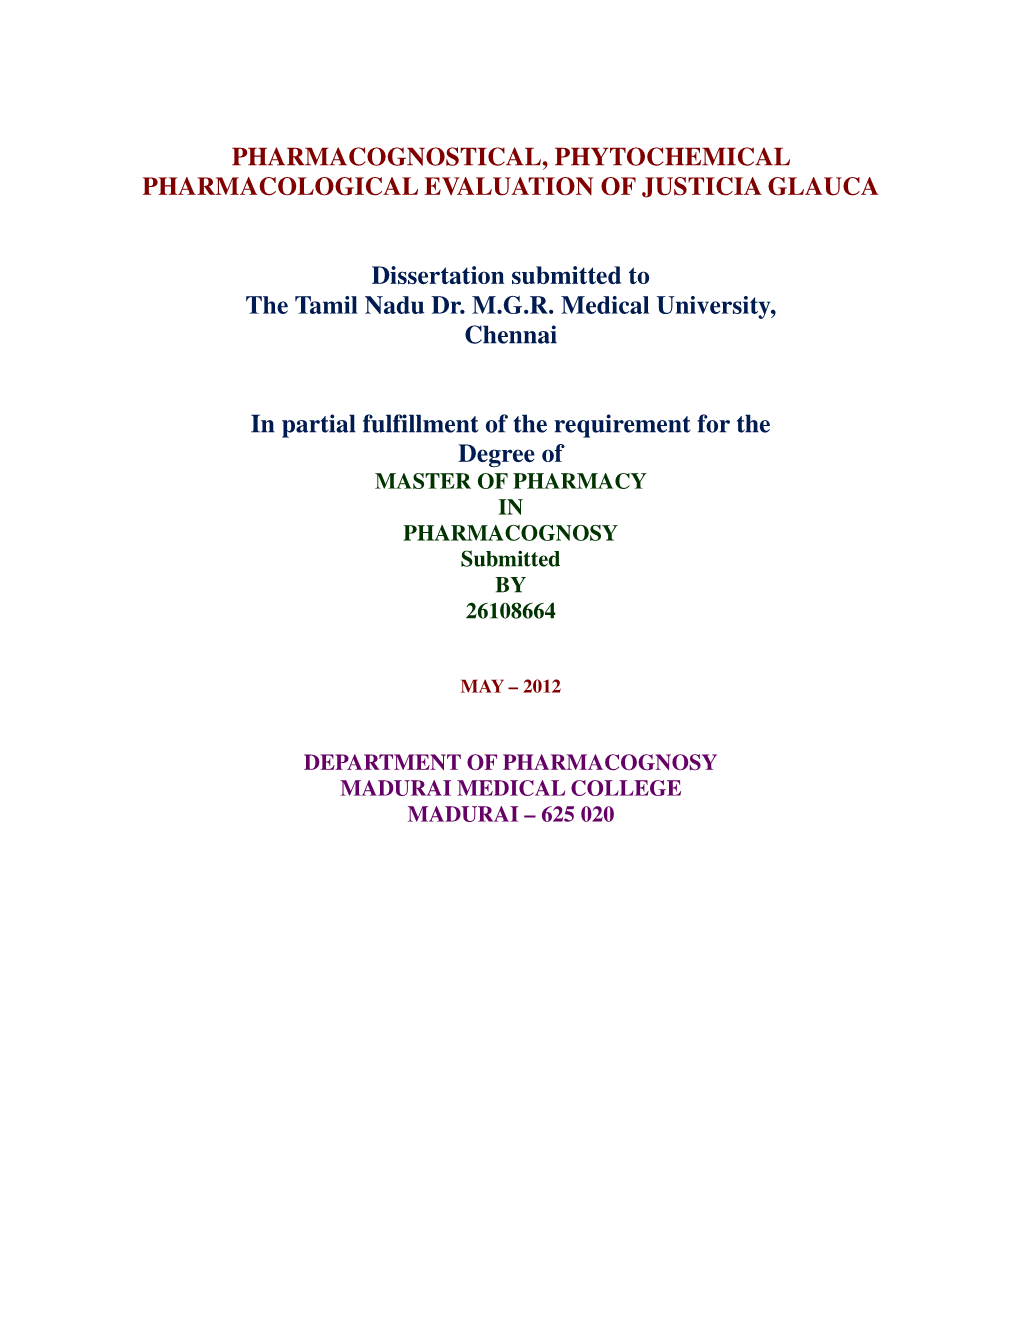 Pharmacognostical, Phytochemical Pharmacological Evaluation of Justicia Glauca